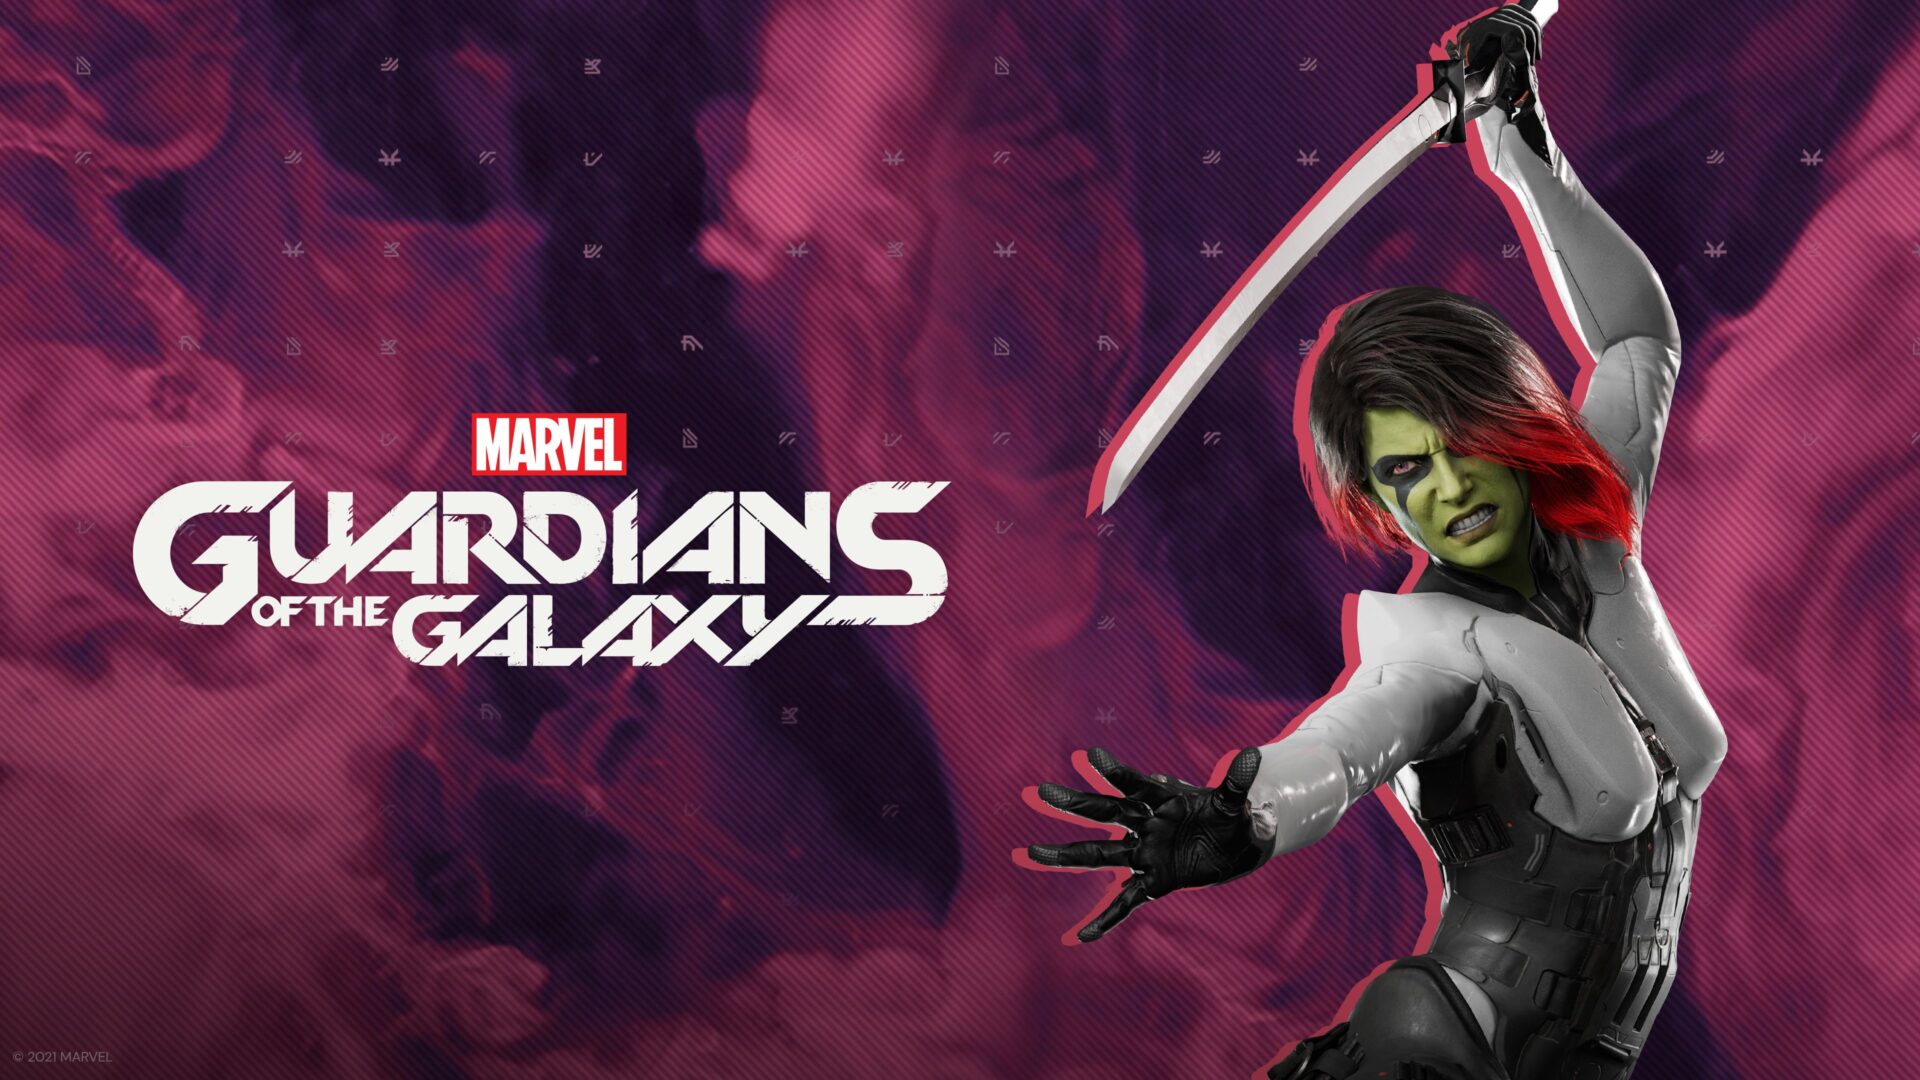 Marvel's Guadians of the Galaxy